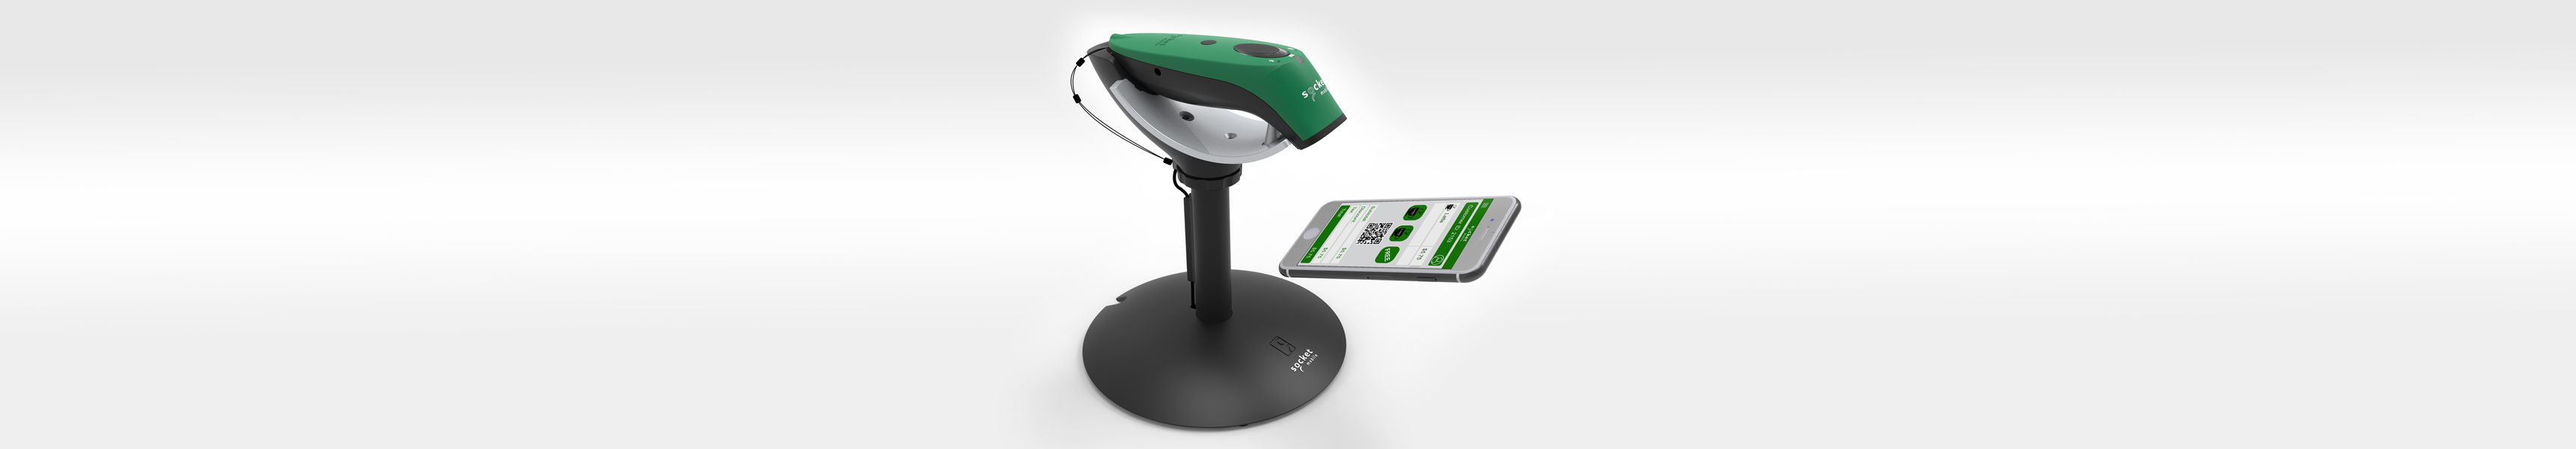 Charging-Stand-with-Security-Feature-Use-Case